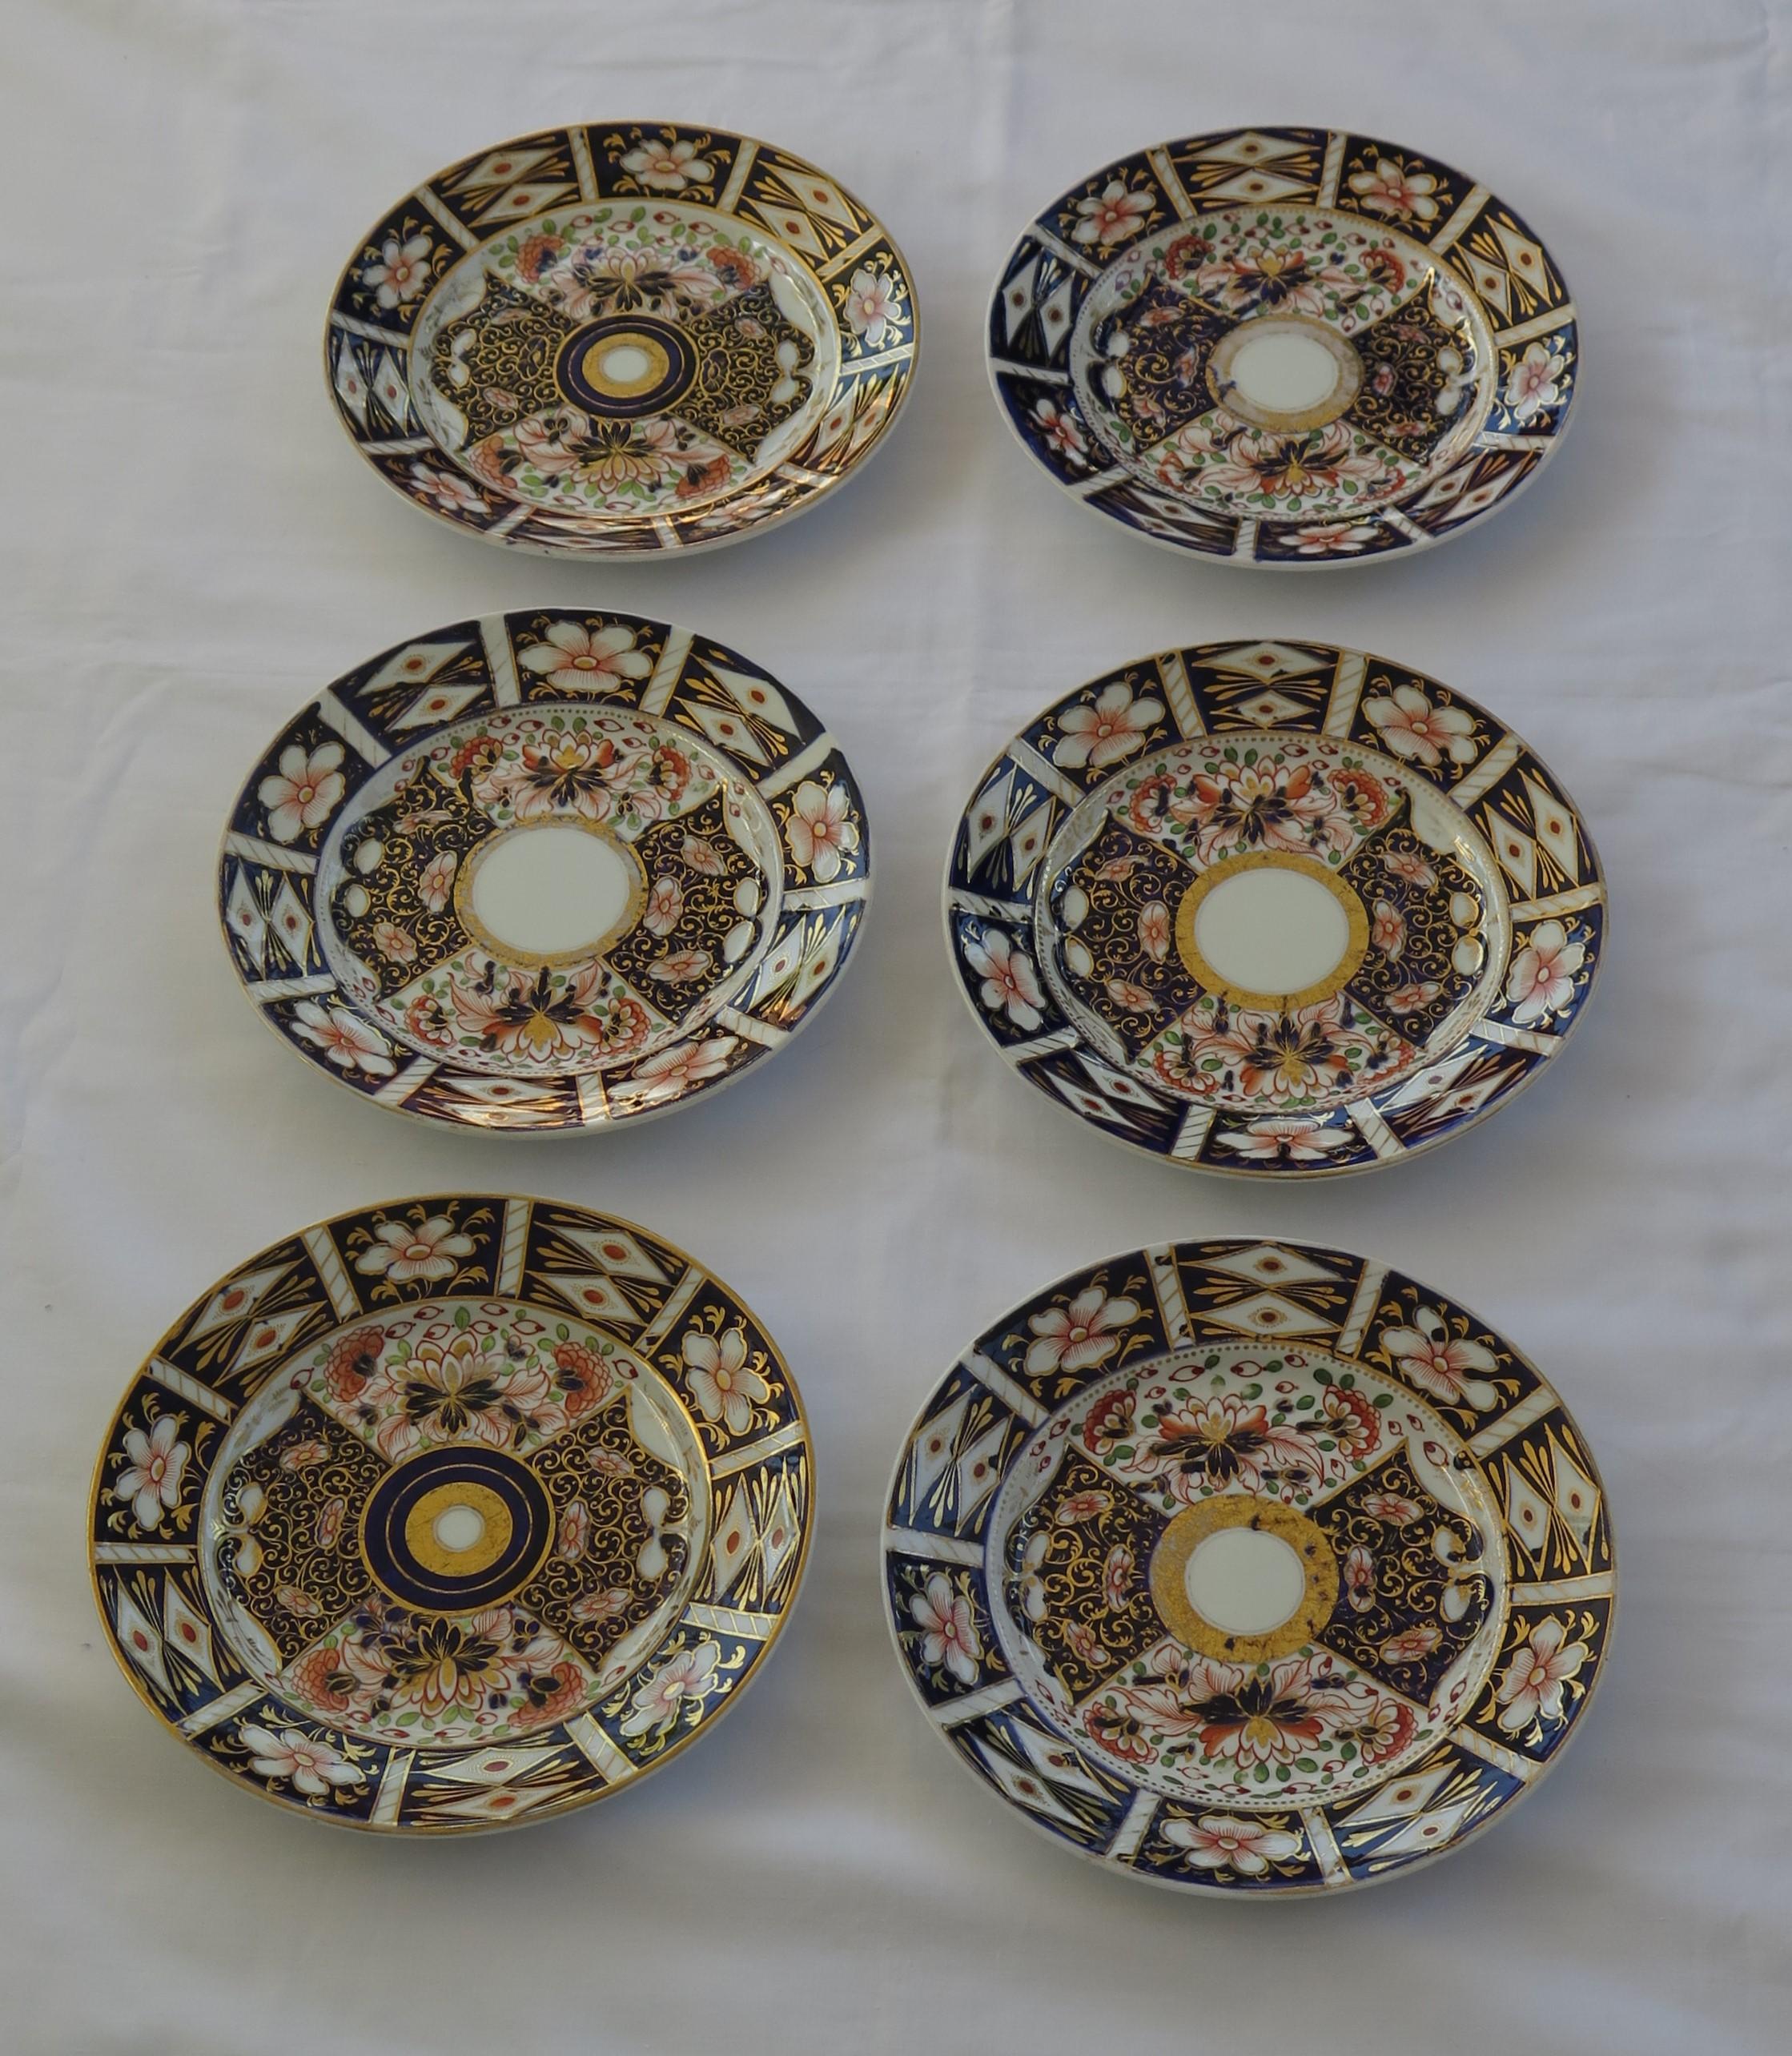 SIX Davenport Porcelain Plates Hand Painted and Gilded Pattern, Circa 1870 In Good Condition For Sale In Lincoln, Lincolnshire